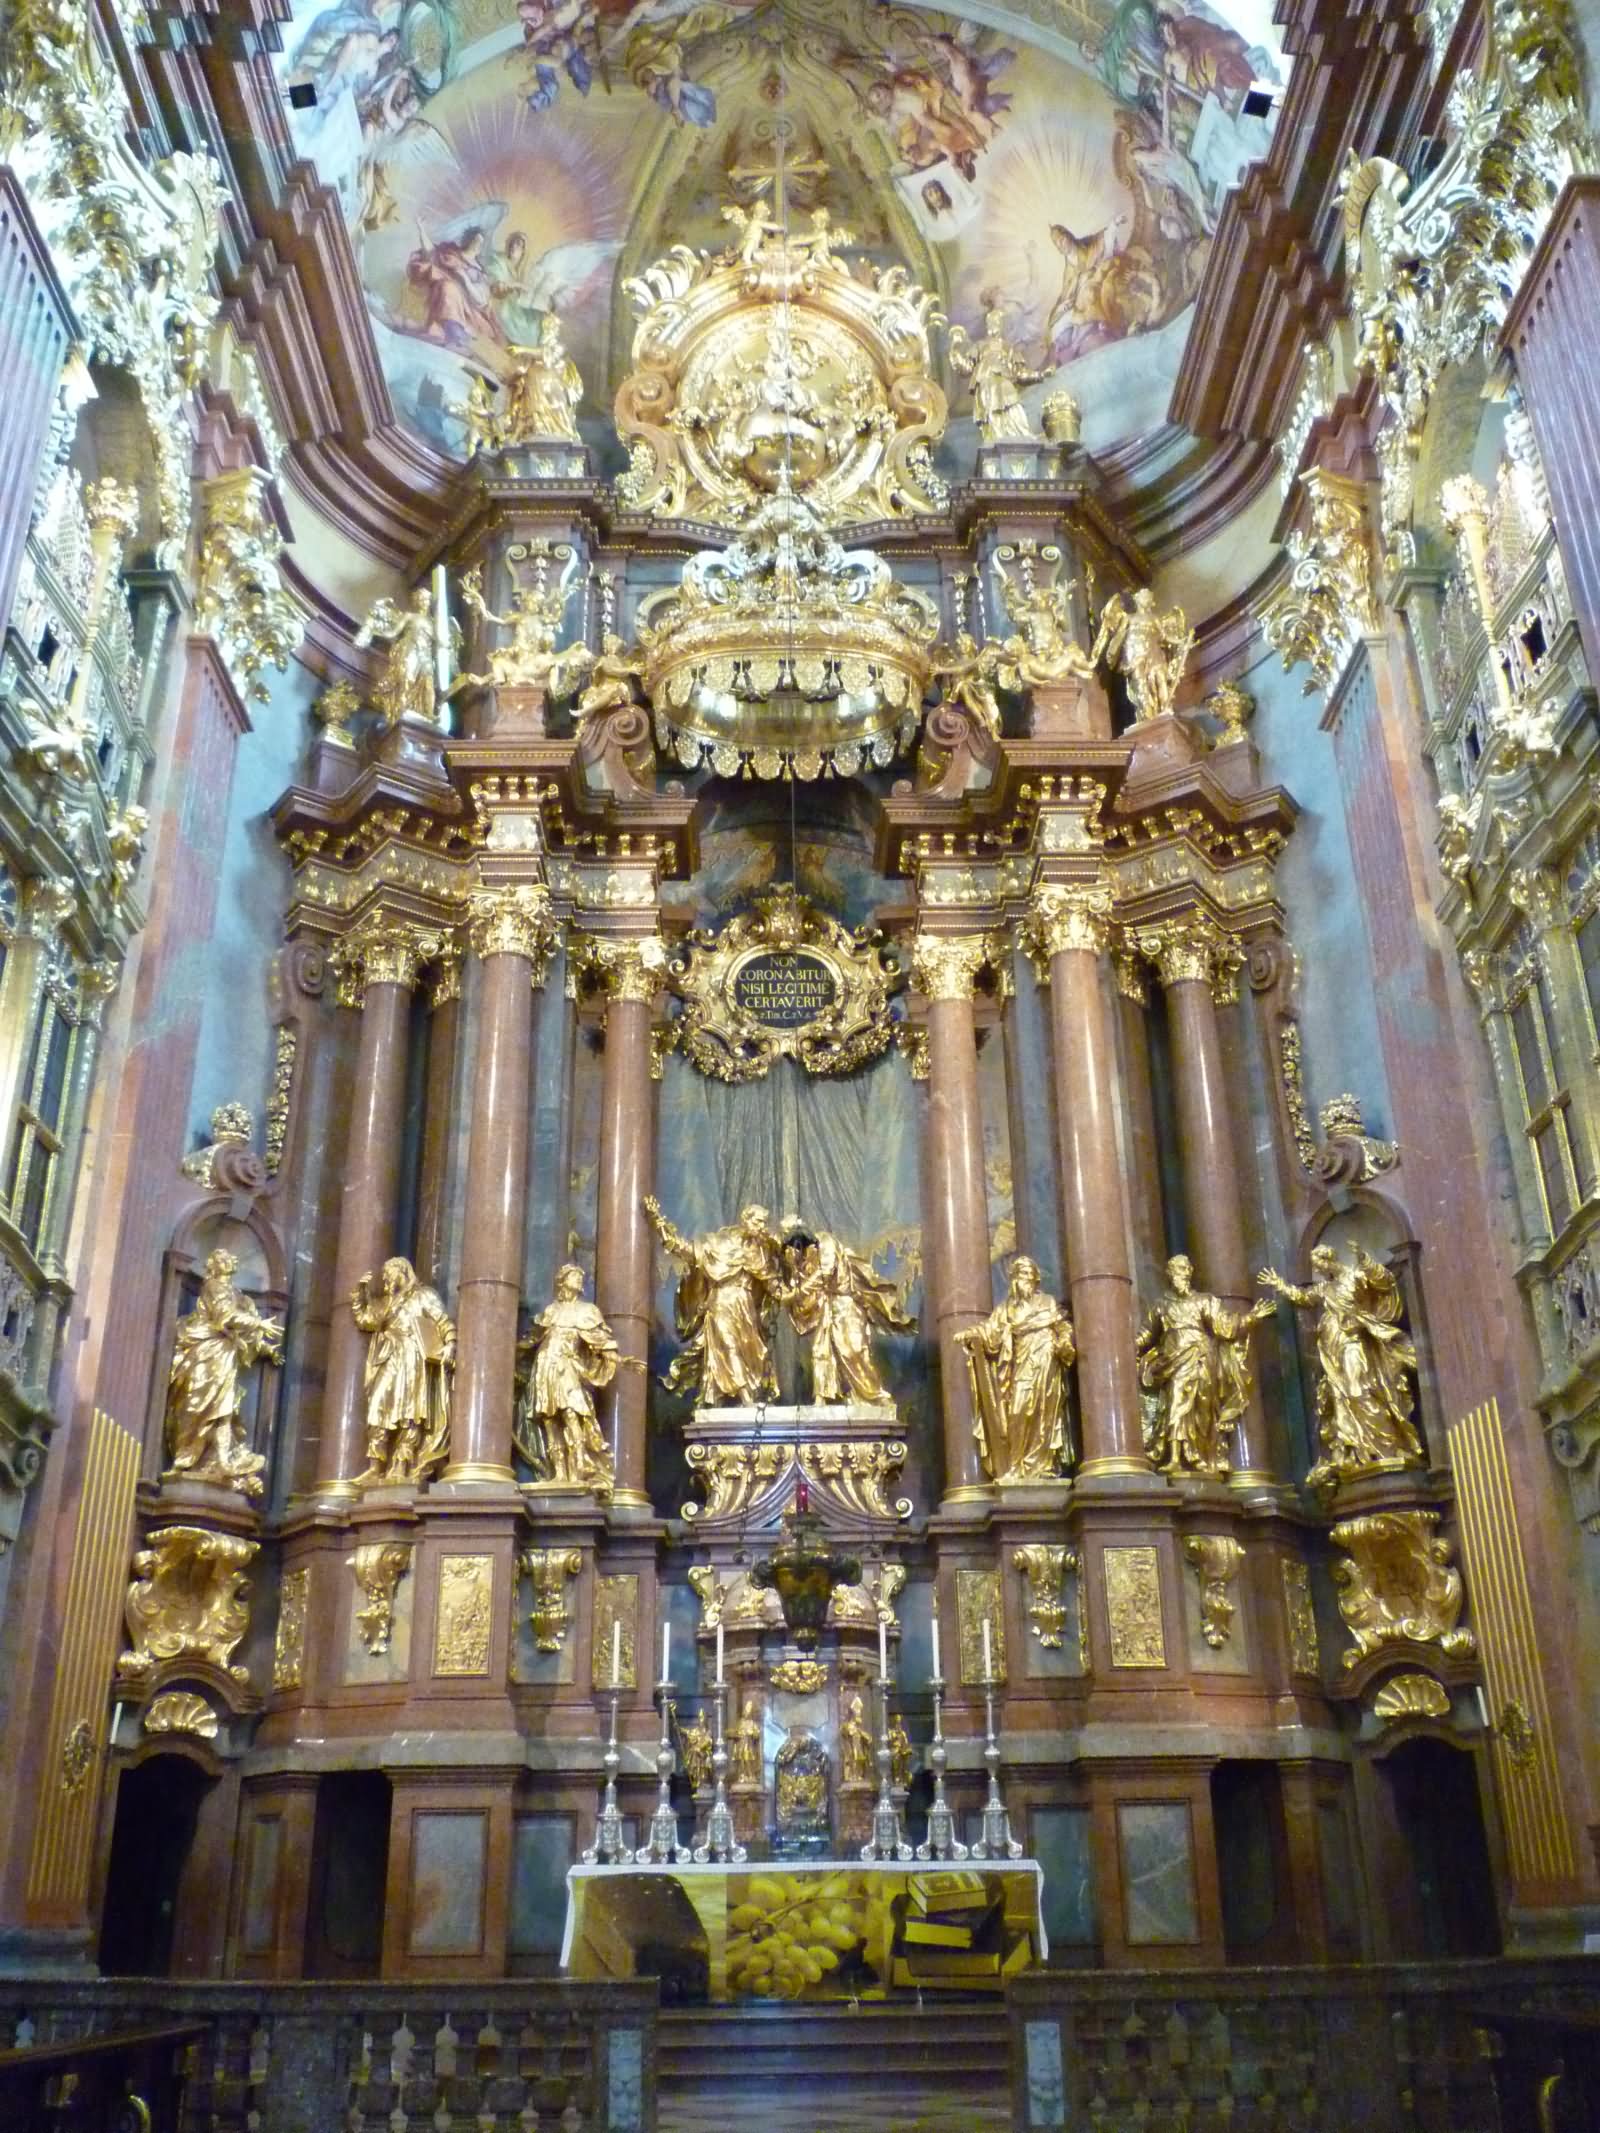 40 Most Adorable Inside Pictures Of The Melk Abbey In Austria